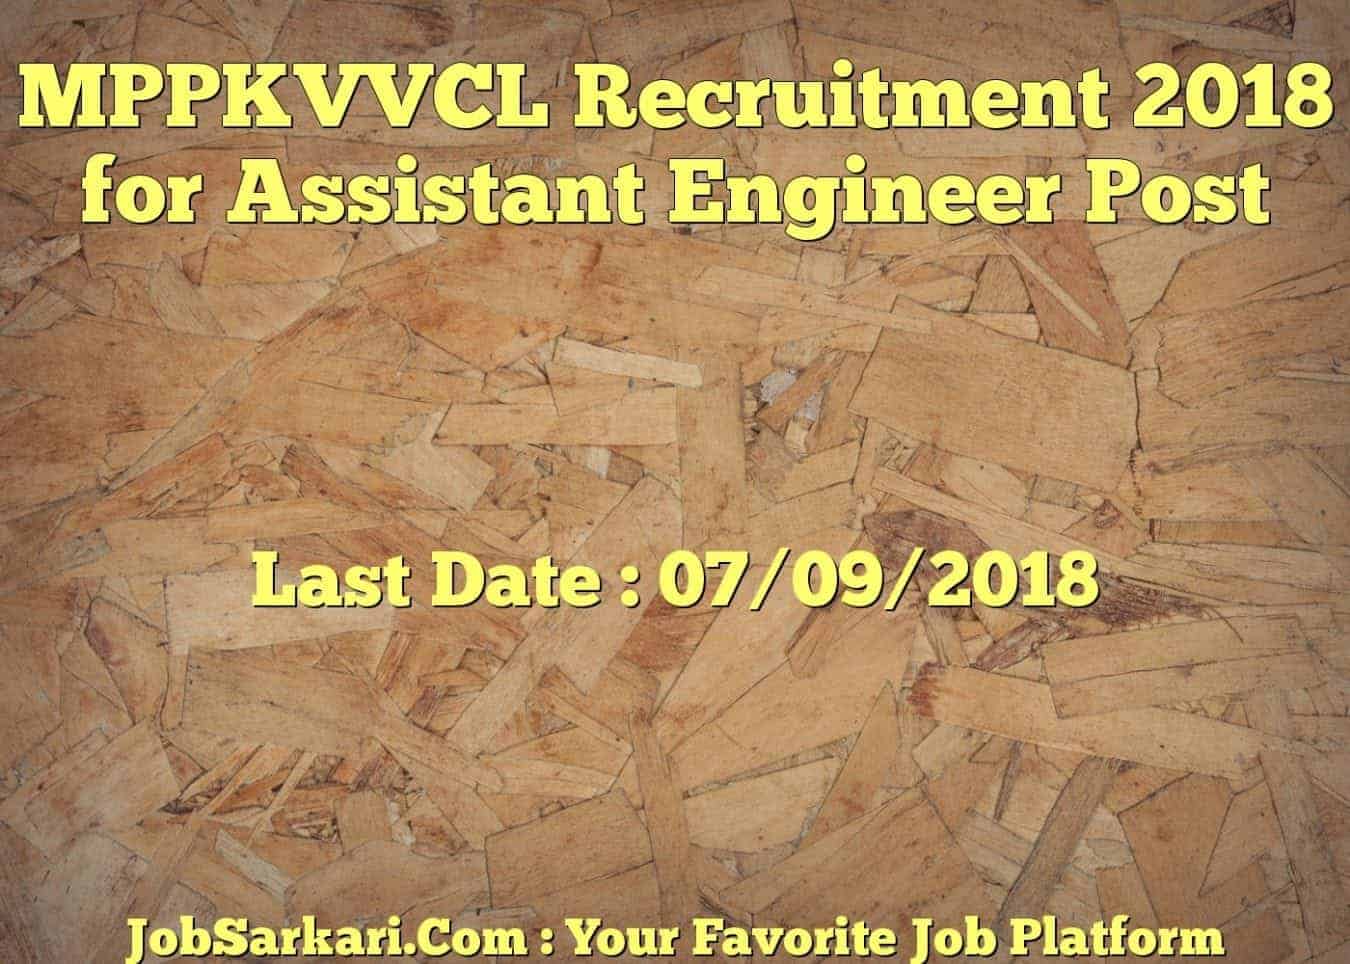 MPPKVVCL Recruitment 2018 for Assistant Engineer Post